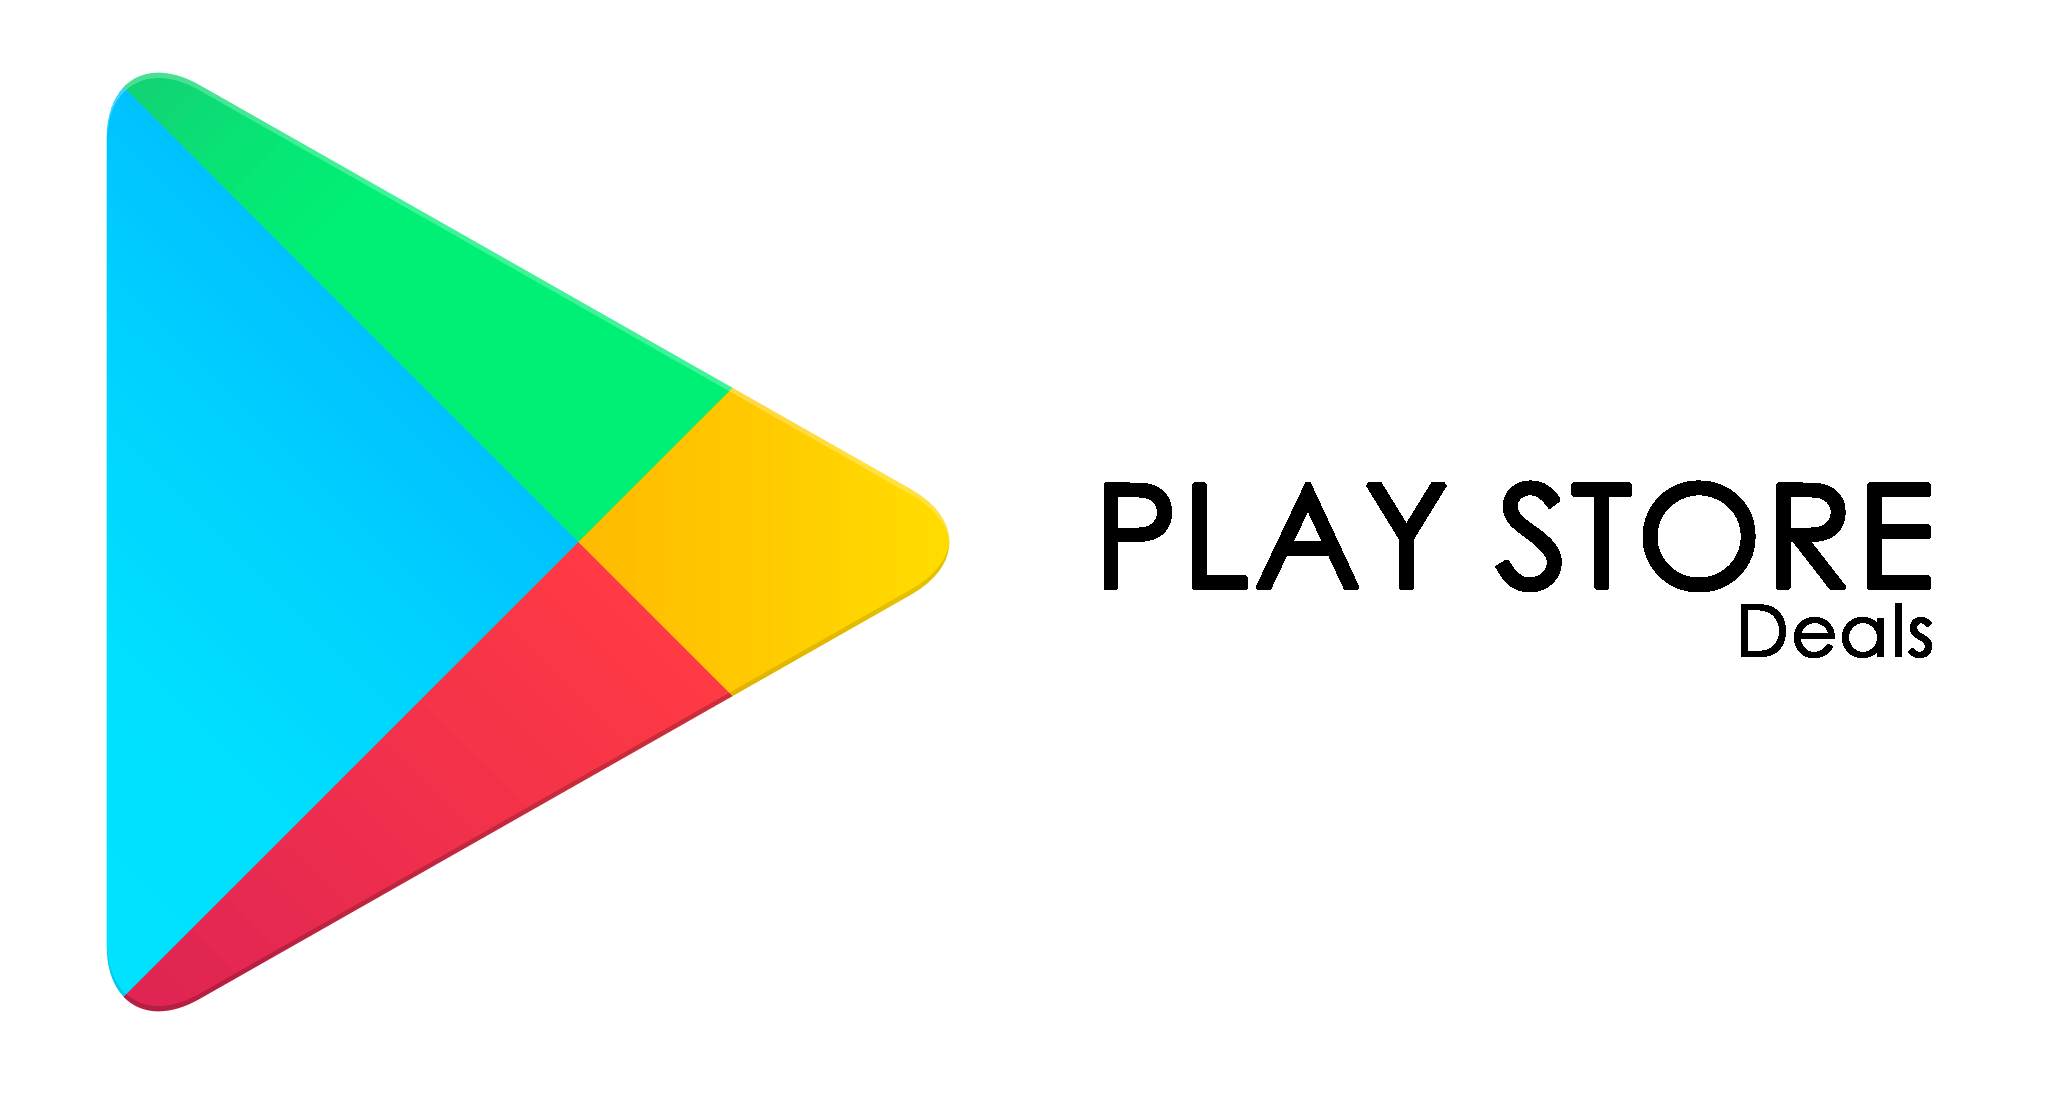 play store download 4.1.10 download and install on your android